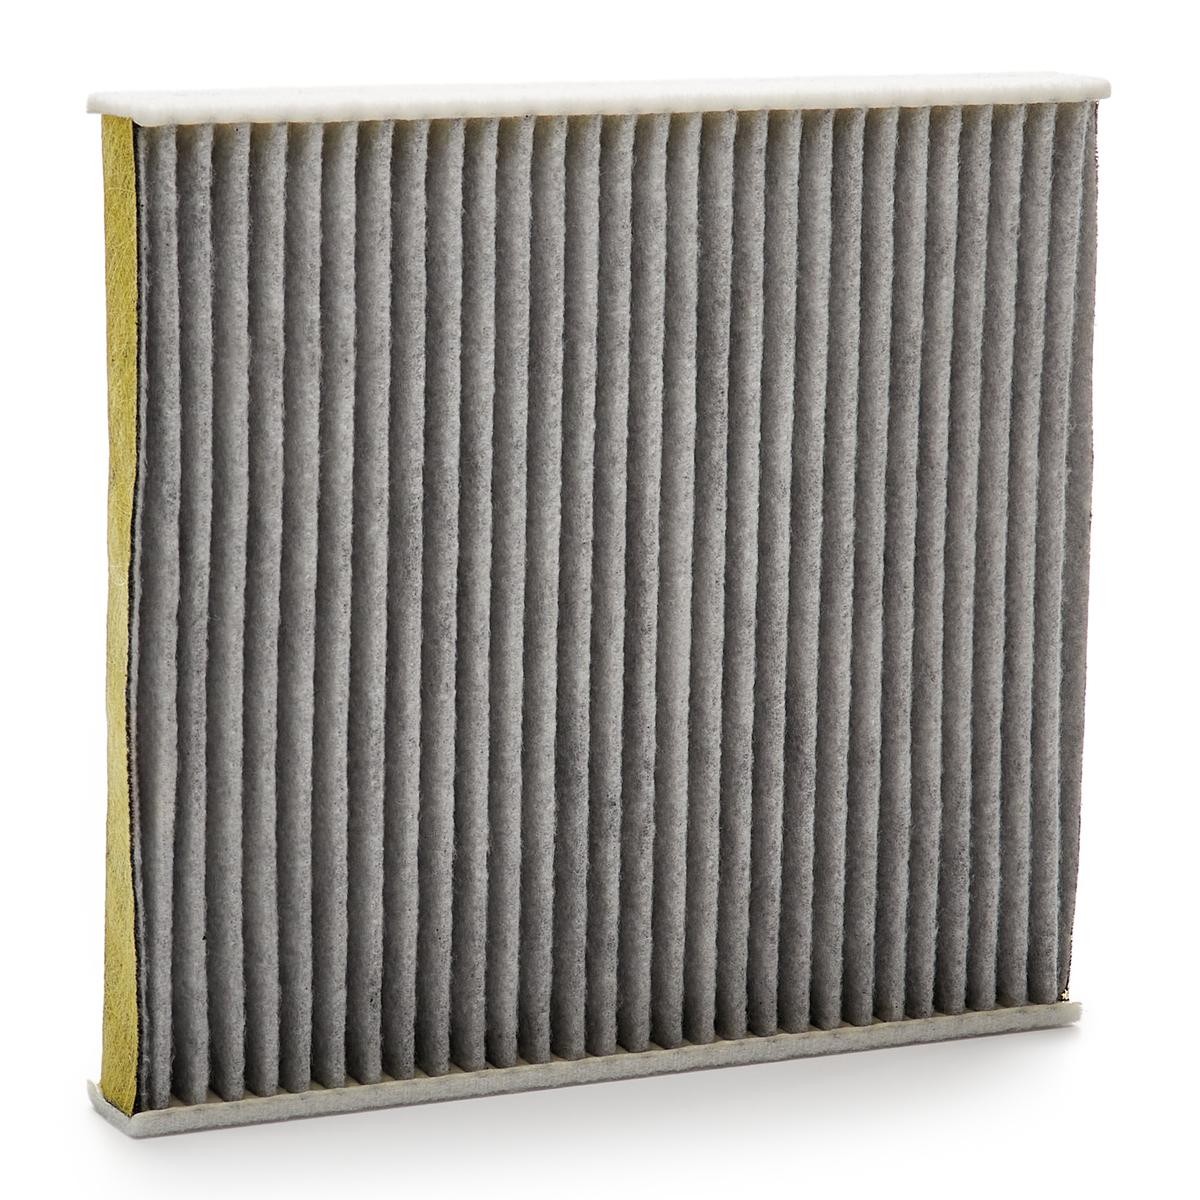 MANN-FILTER FP 26 009 Pollen filter Activated Carbon Filter with polyphenol, with antibacterial action, Particulate filter (PM 2.5), with fungicidal effect, Activated Carbon Filter, 254 mm x 235 mm x 32 mm, FreciousPlus